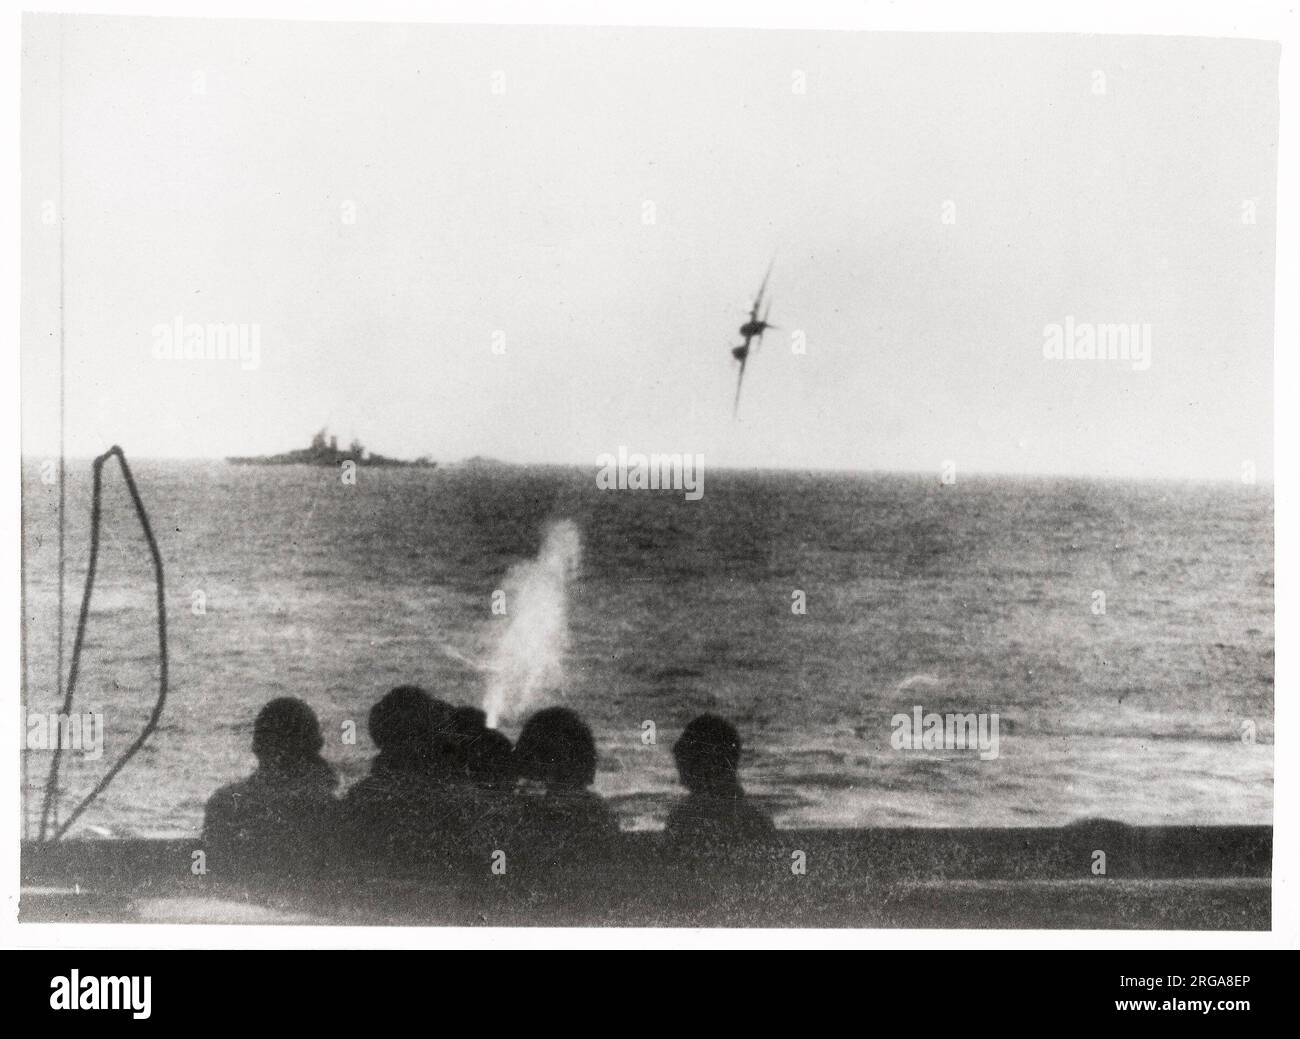 Vintage World War II photograph - Japanese suicide kamikaze attack on an American battleship in the Pacific. The plane was brought down just short of the ship. Stock Photo